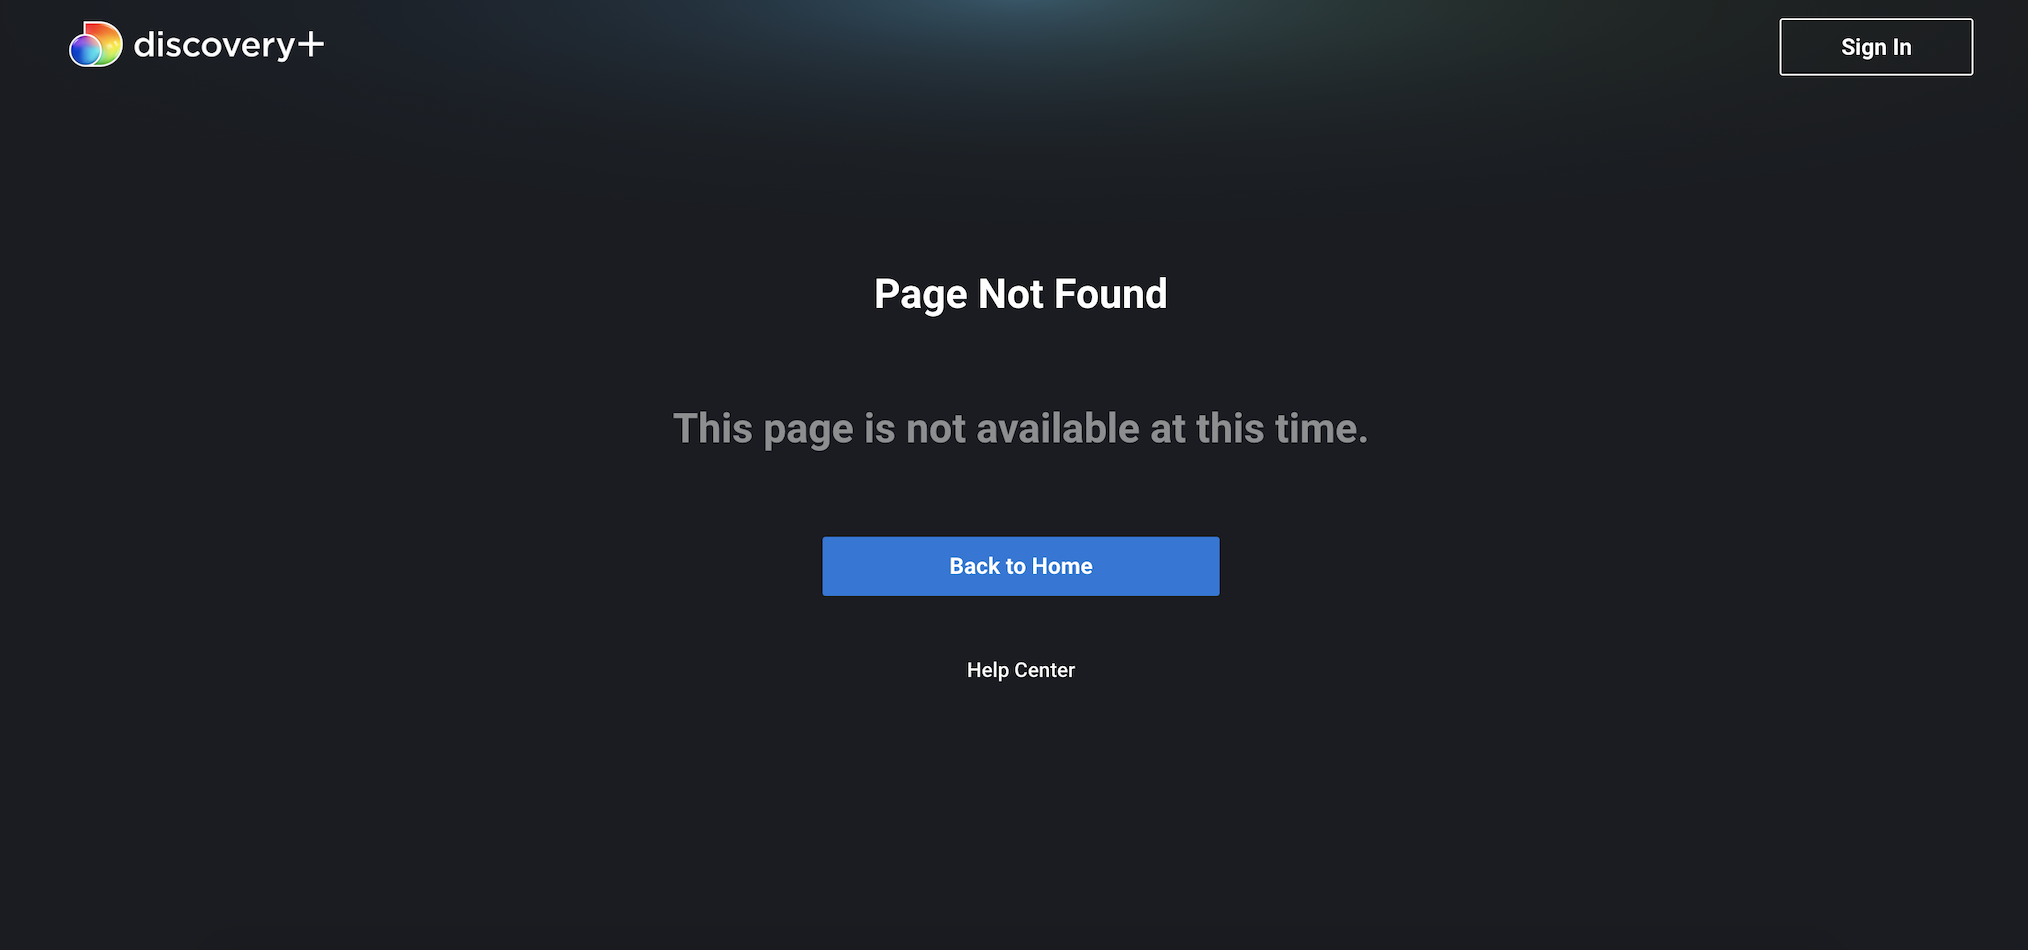 Discovery+ page not found error message